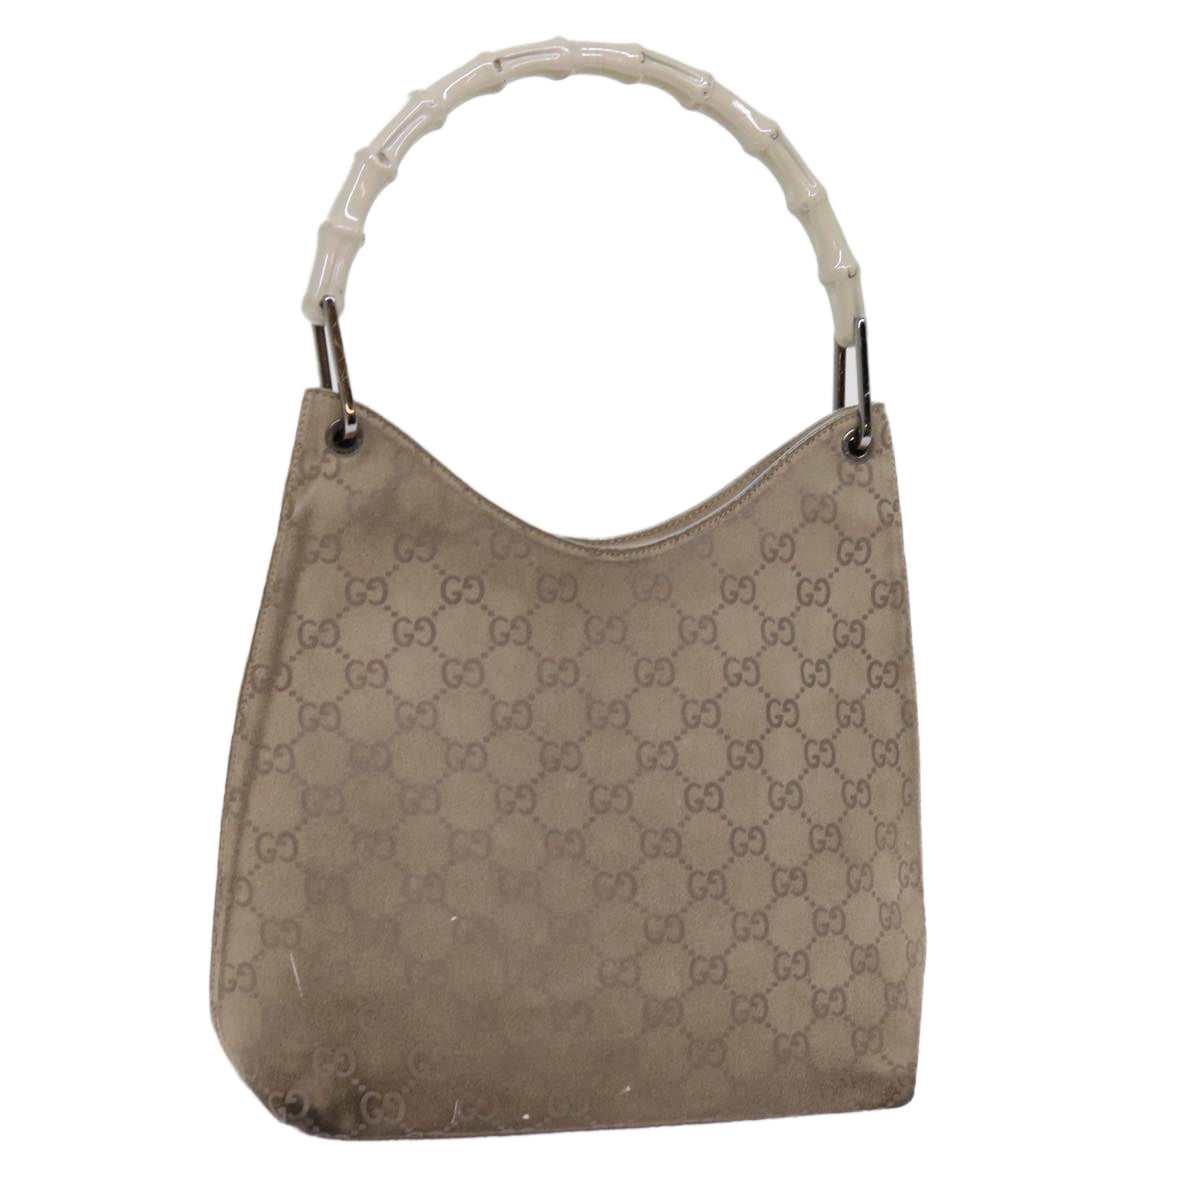 GUCCI GG Canvas Bamboo Shoulder Bag Gray 001 2058 3007 Auth 69361